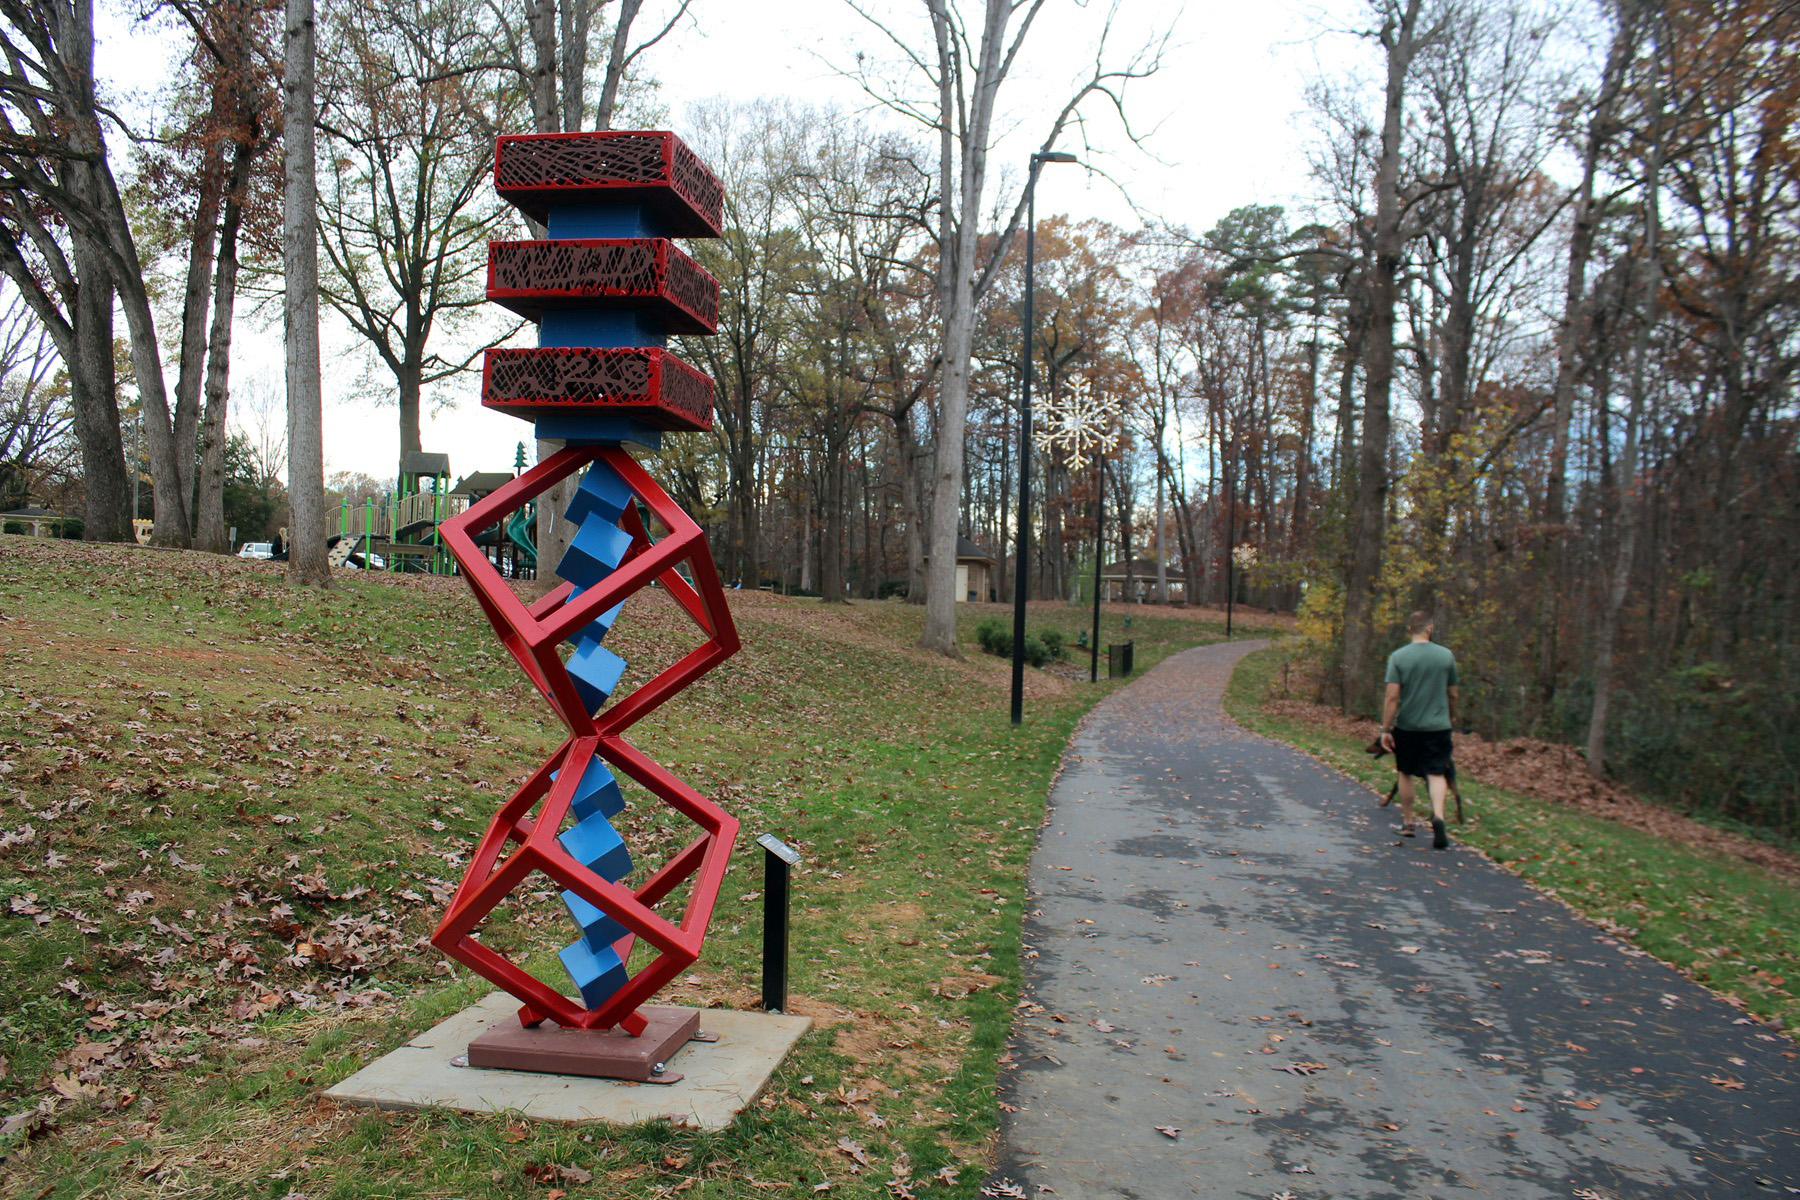 The steel-and-cast-iron sculpture “Cube in Motion,” by Hanna Jubran, is one of the six artworks found in the SculpTOUR exhibition in Huntersville's Holbrook Park, along the downtown greenway. 